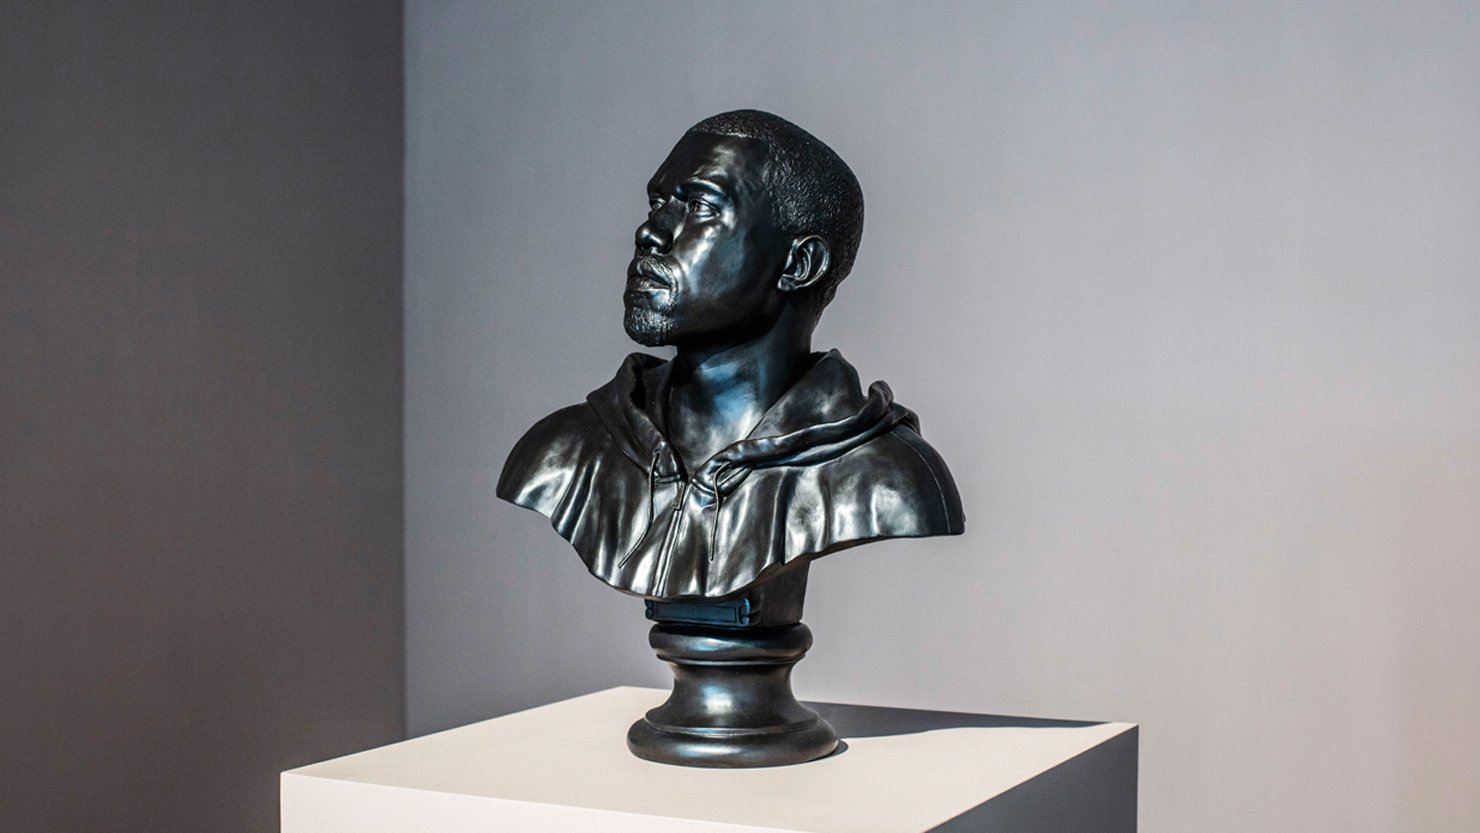 Kanye, 2015 by Kehinde Wiley on display in Plymouth's Levinsky Gallery, autumn 2020